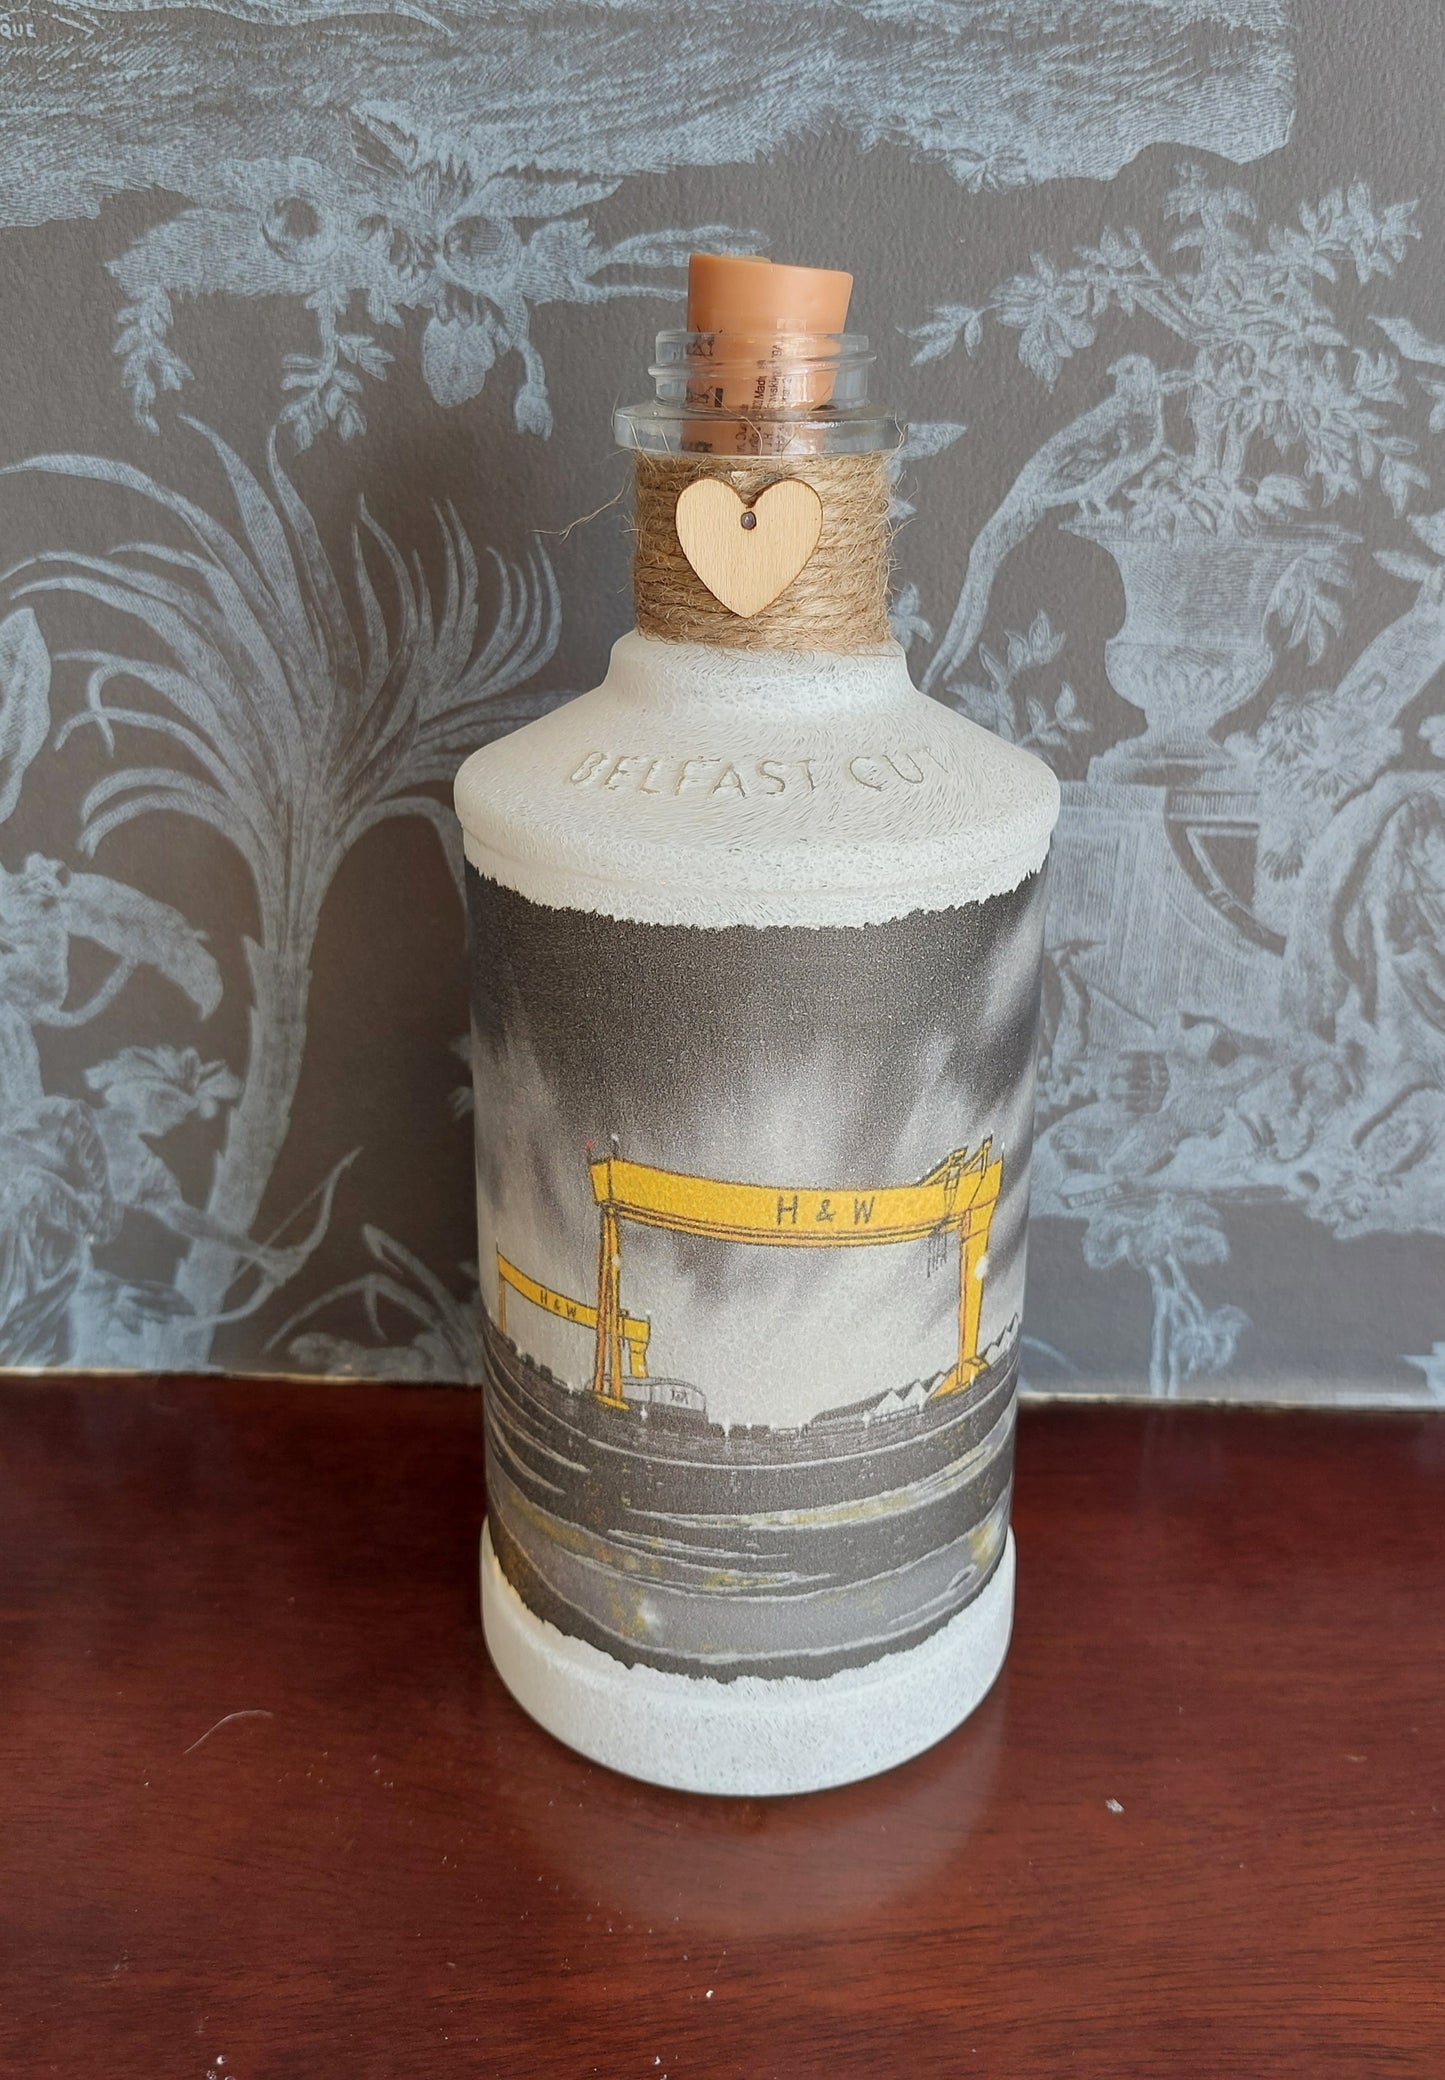 Limited Edition Stephen McCurdy Art "Harland and Wolff on a Rainy night" light up bottle